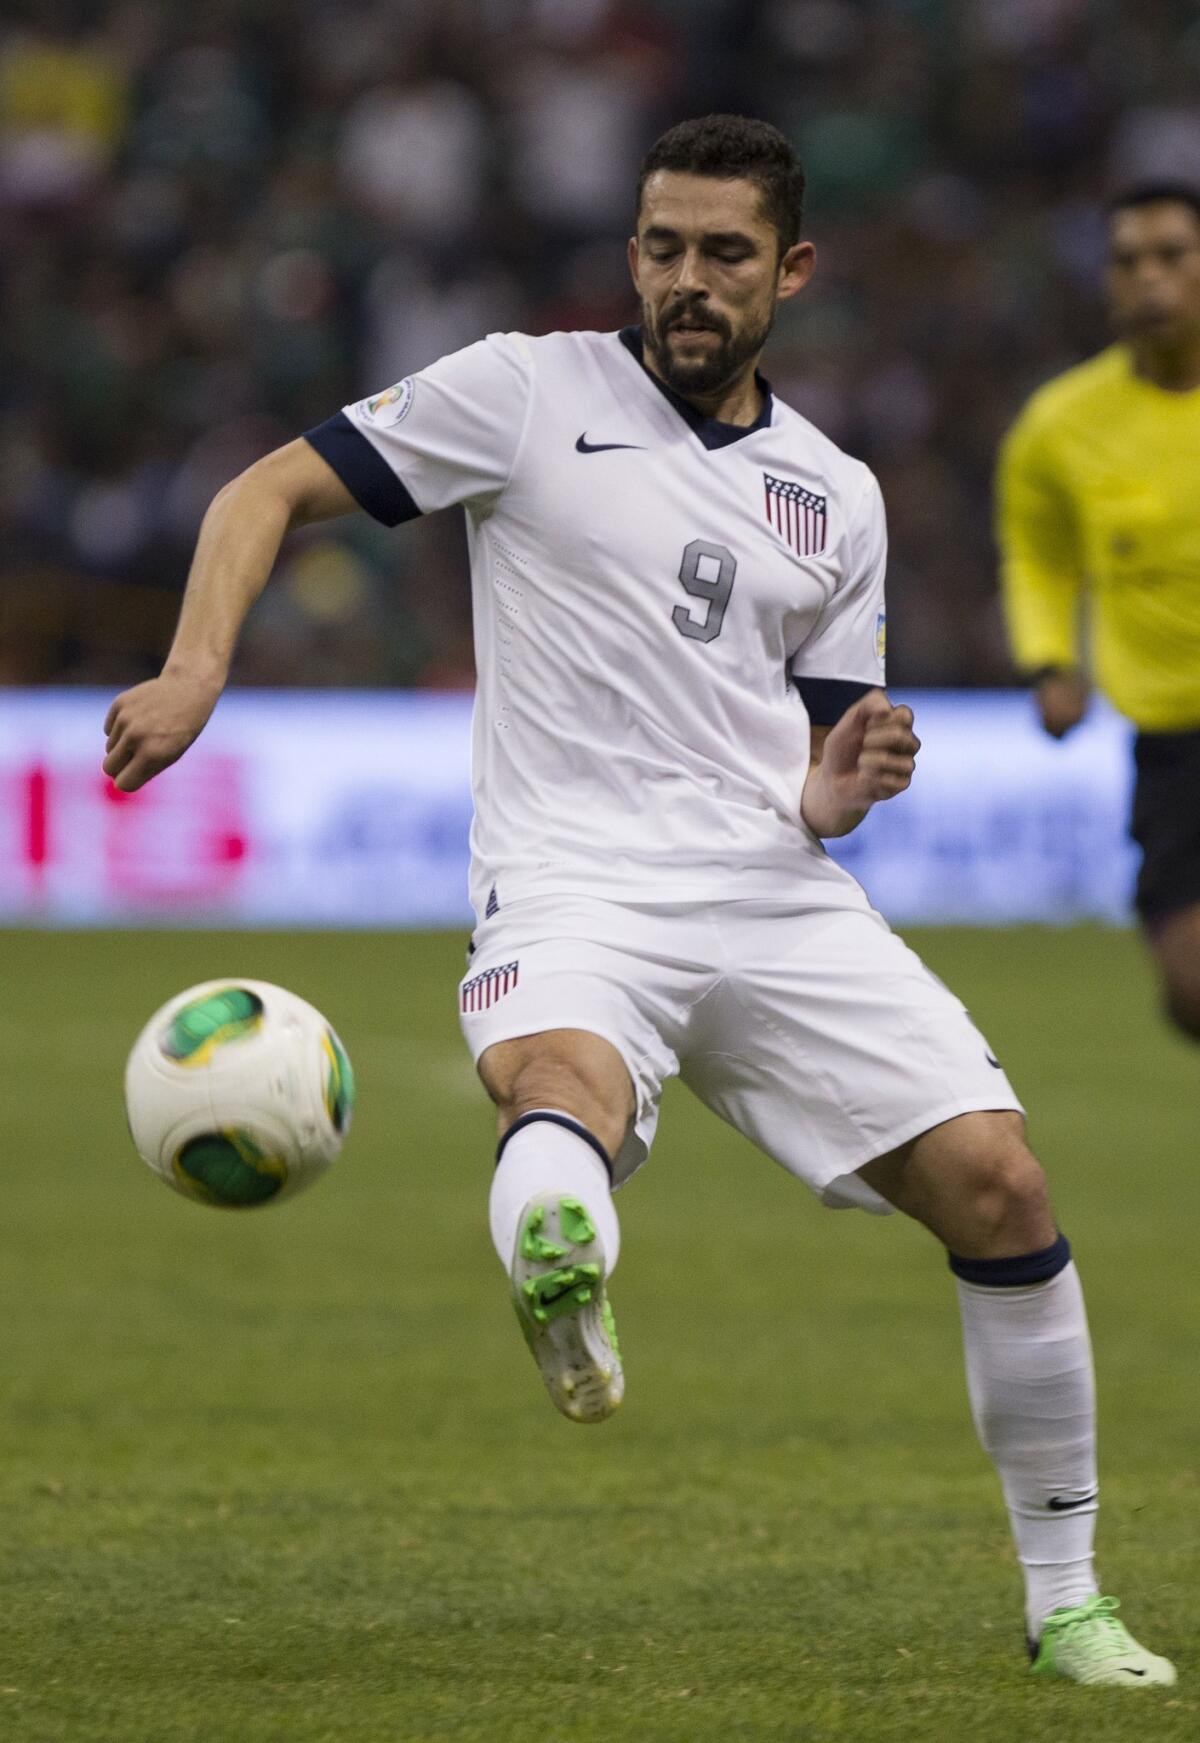 U.S. forward Herculez Gomez controls the ball during a World Cup qualifying match against Mexico in March. Gomez had a strong performance in Tijuana's 3-3 draw against Club America at StubHub Center in Carson on Saturday.